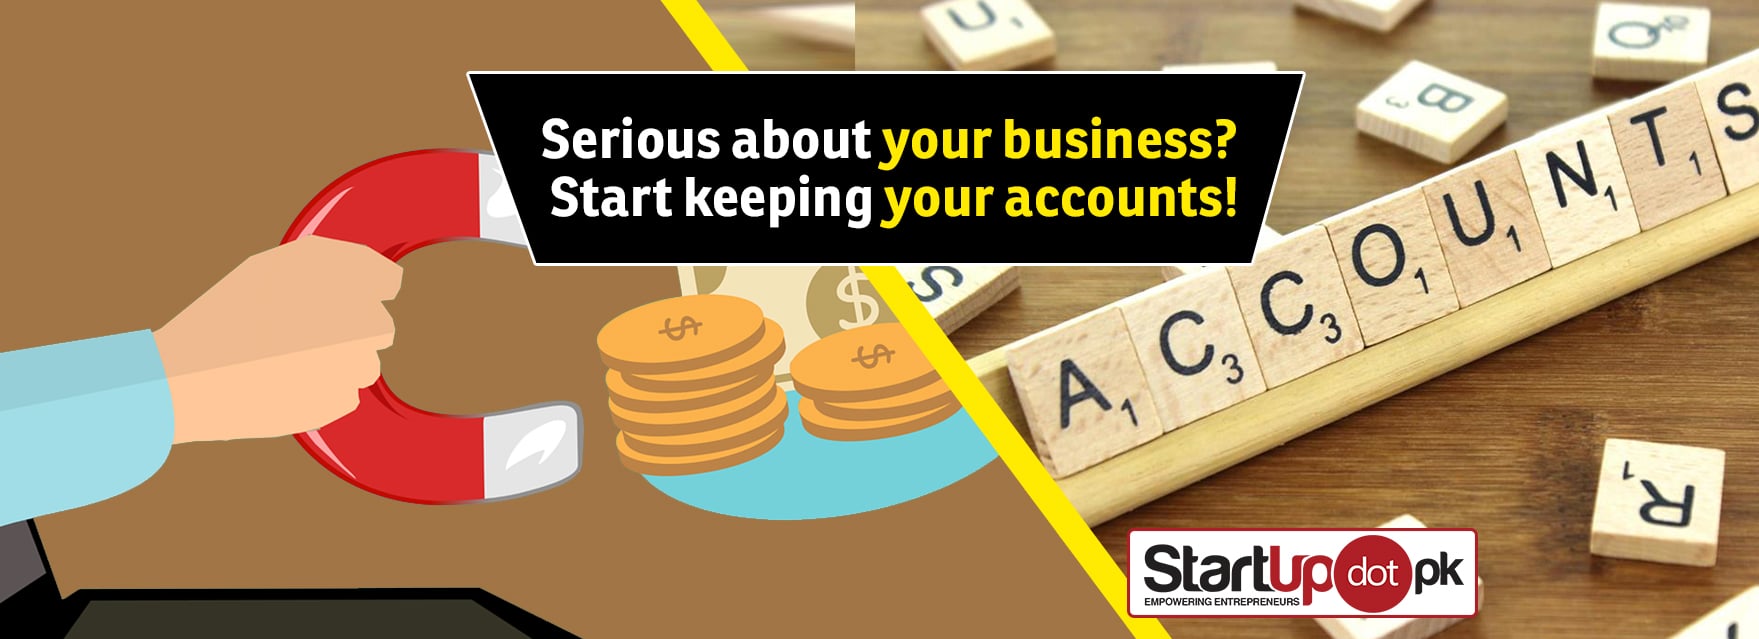 Serious about your business? Strat Keeping accounts